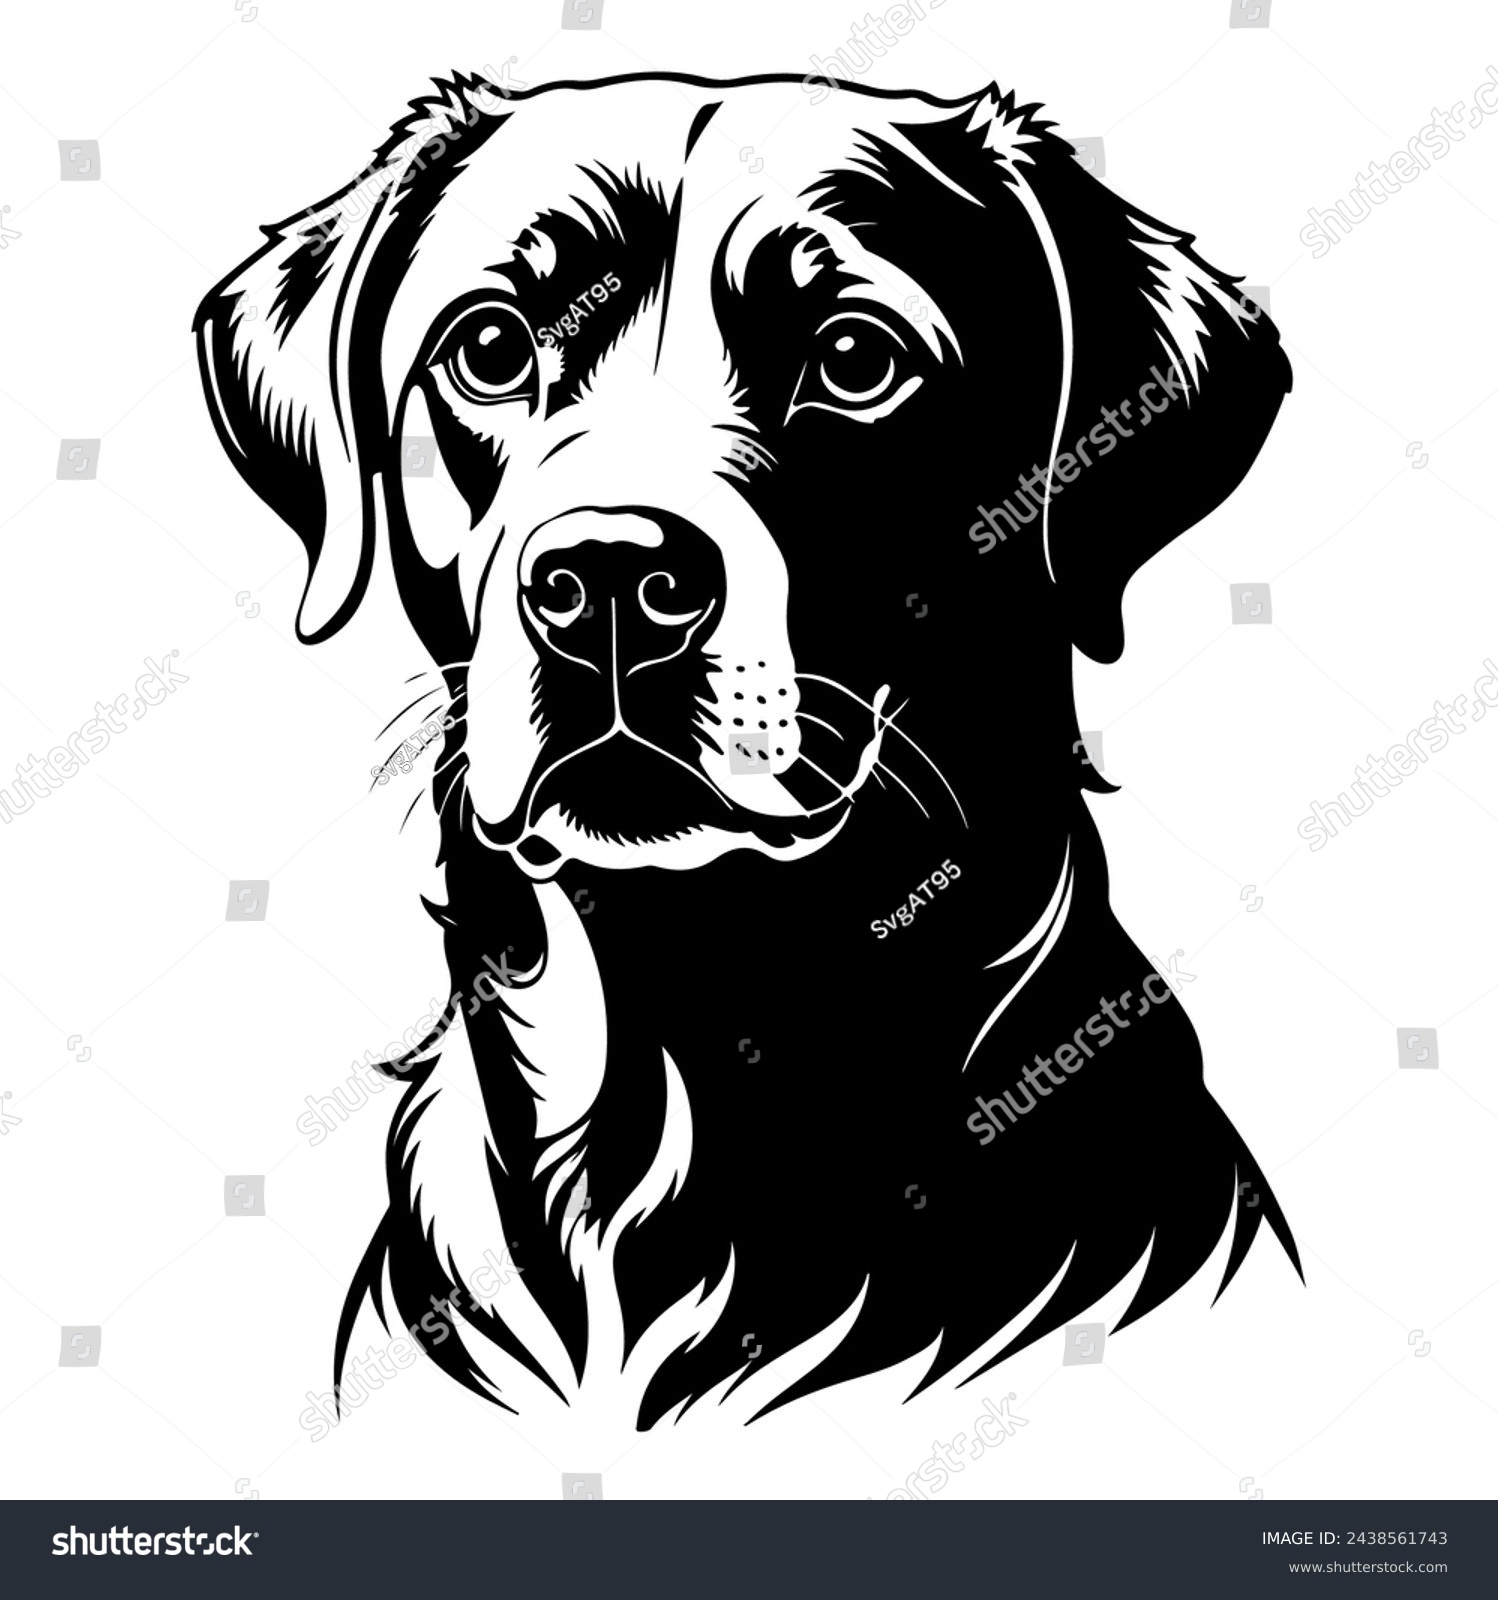 SVG of Portrait of a Labrador Retriever Dog Vector isolated on white background, Dog Silhouettes. svg